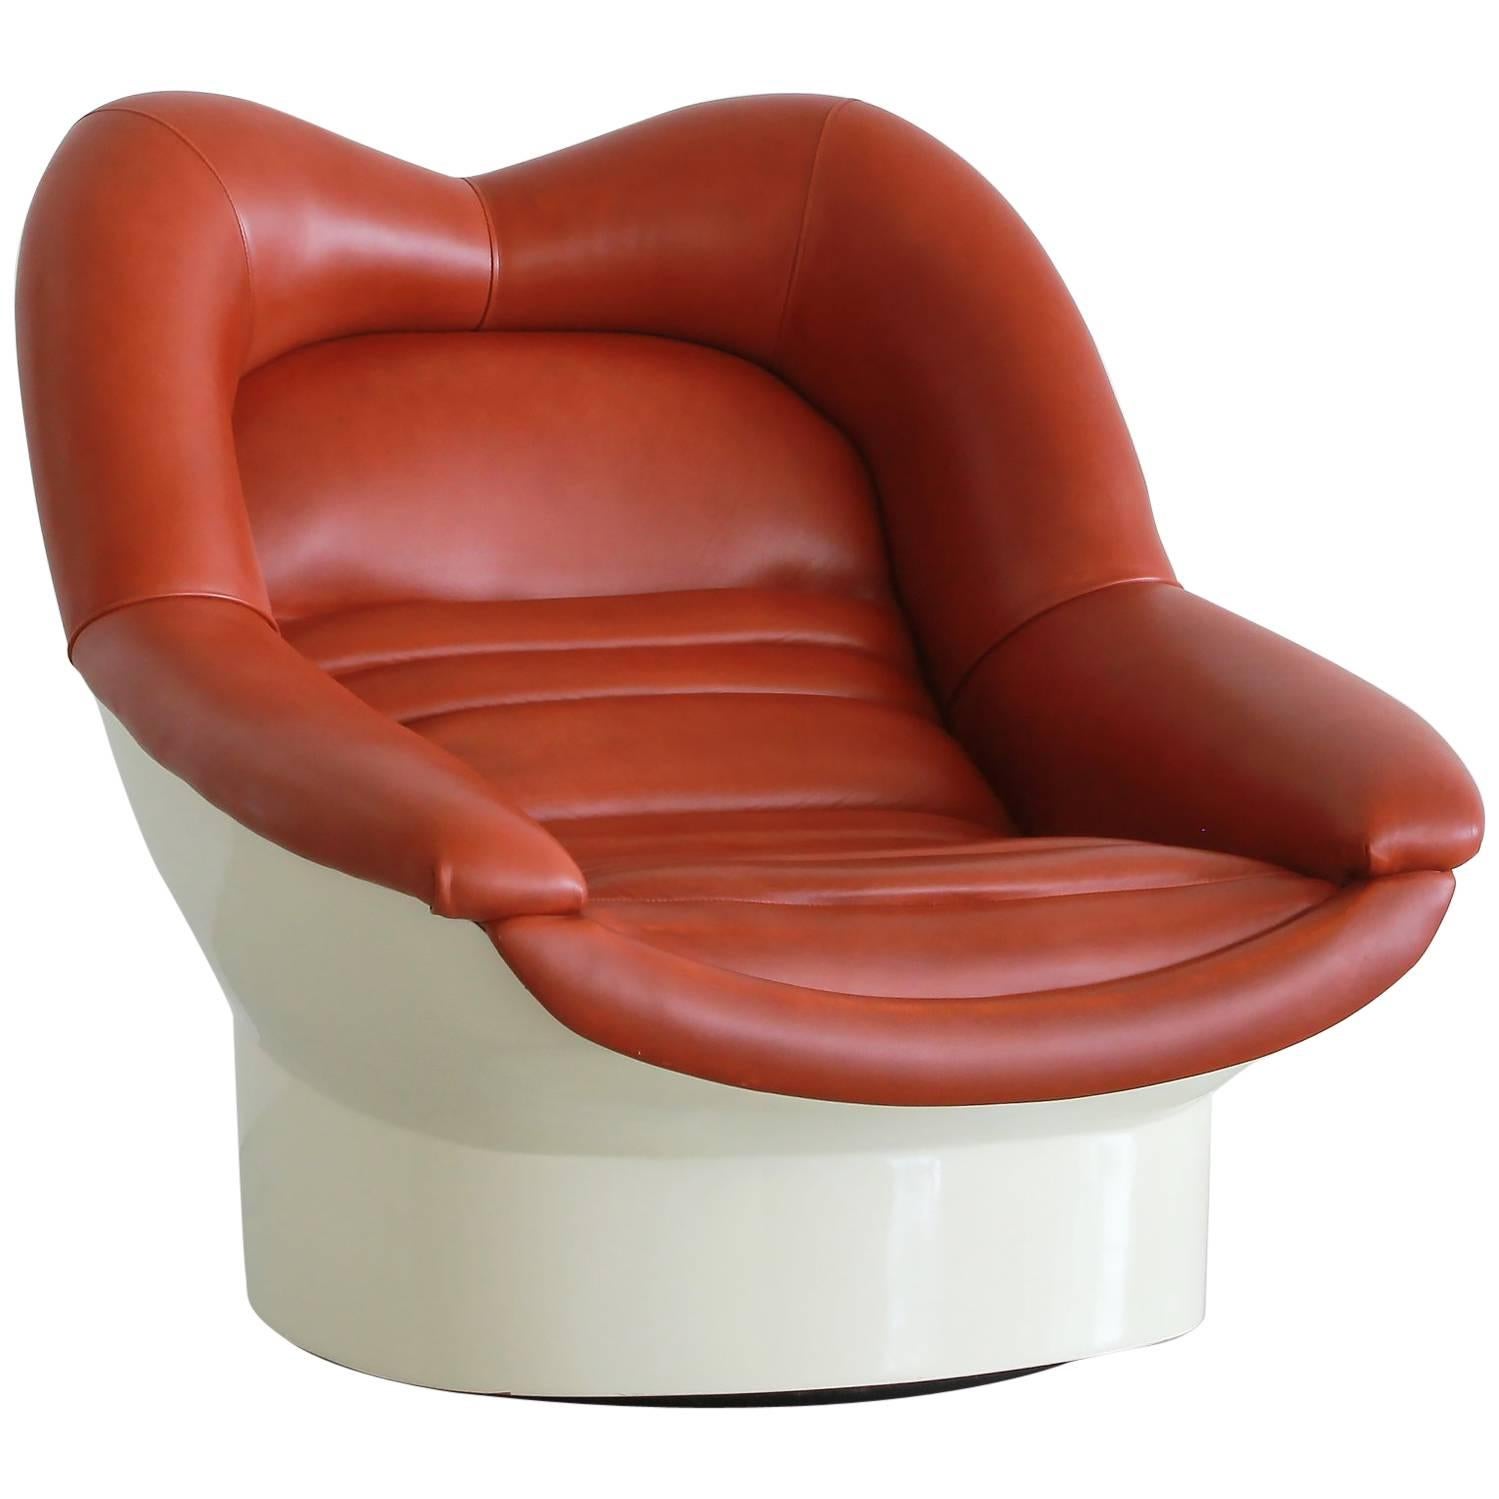 Leather Swivel Chair "Chauffese Alda, 1966" by Cesare Casati and Enzo Hybsch